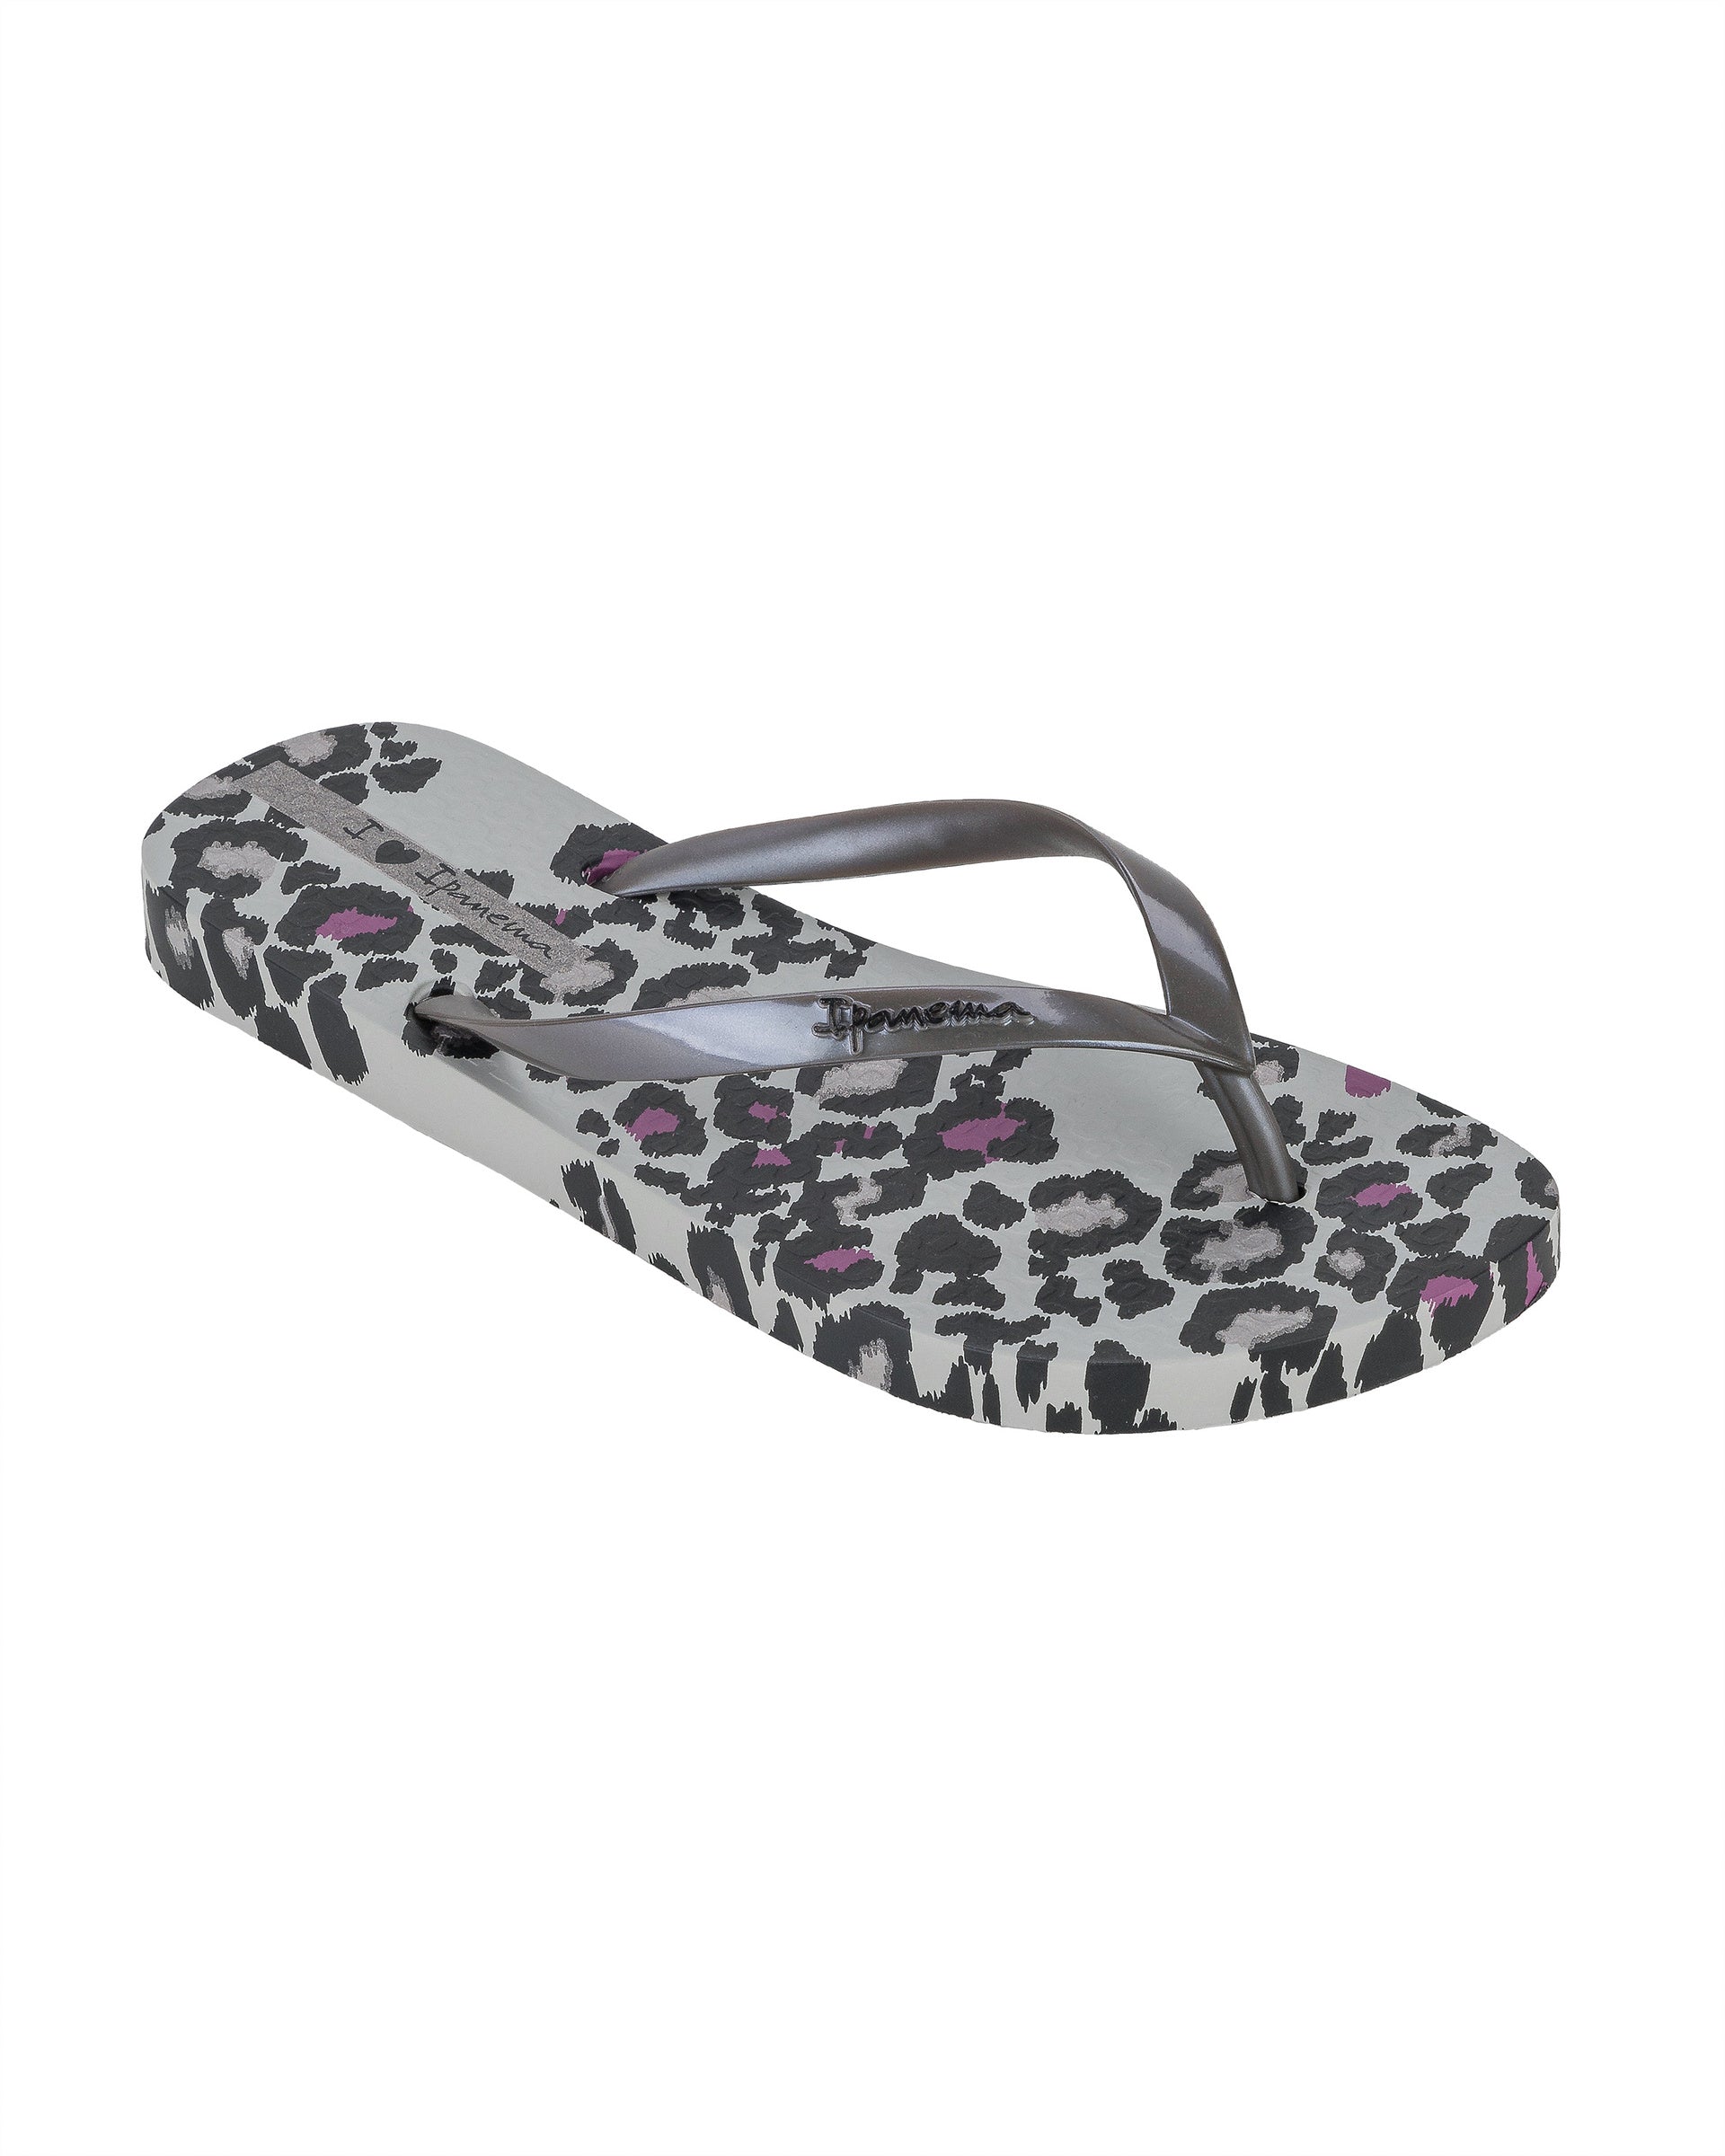 Angled view of a grey Ipanema Animal Print women's flip flop with glitter grey straps and leopard sole print.